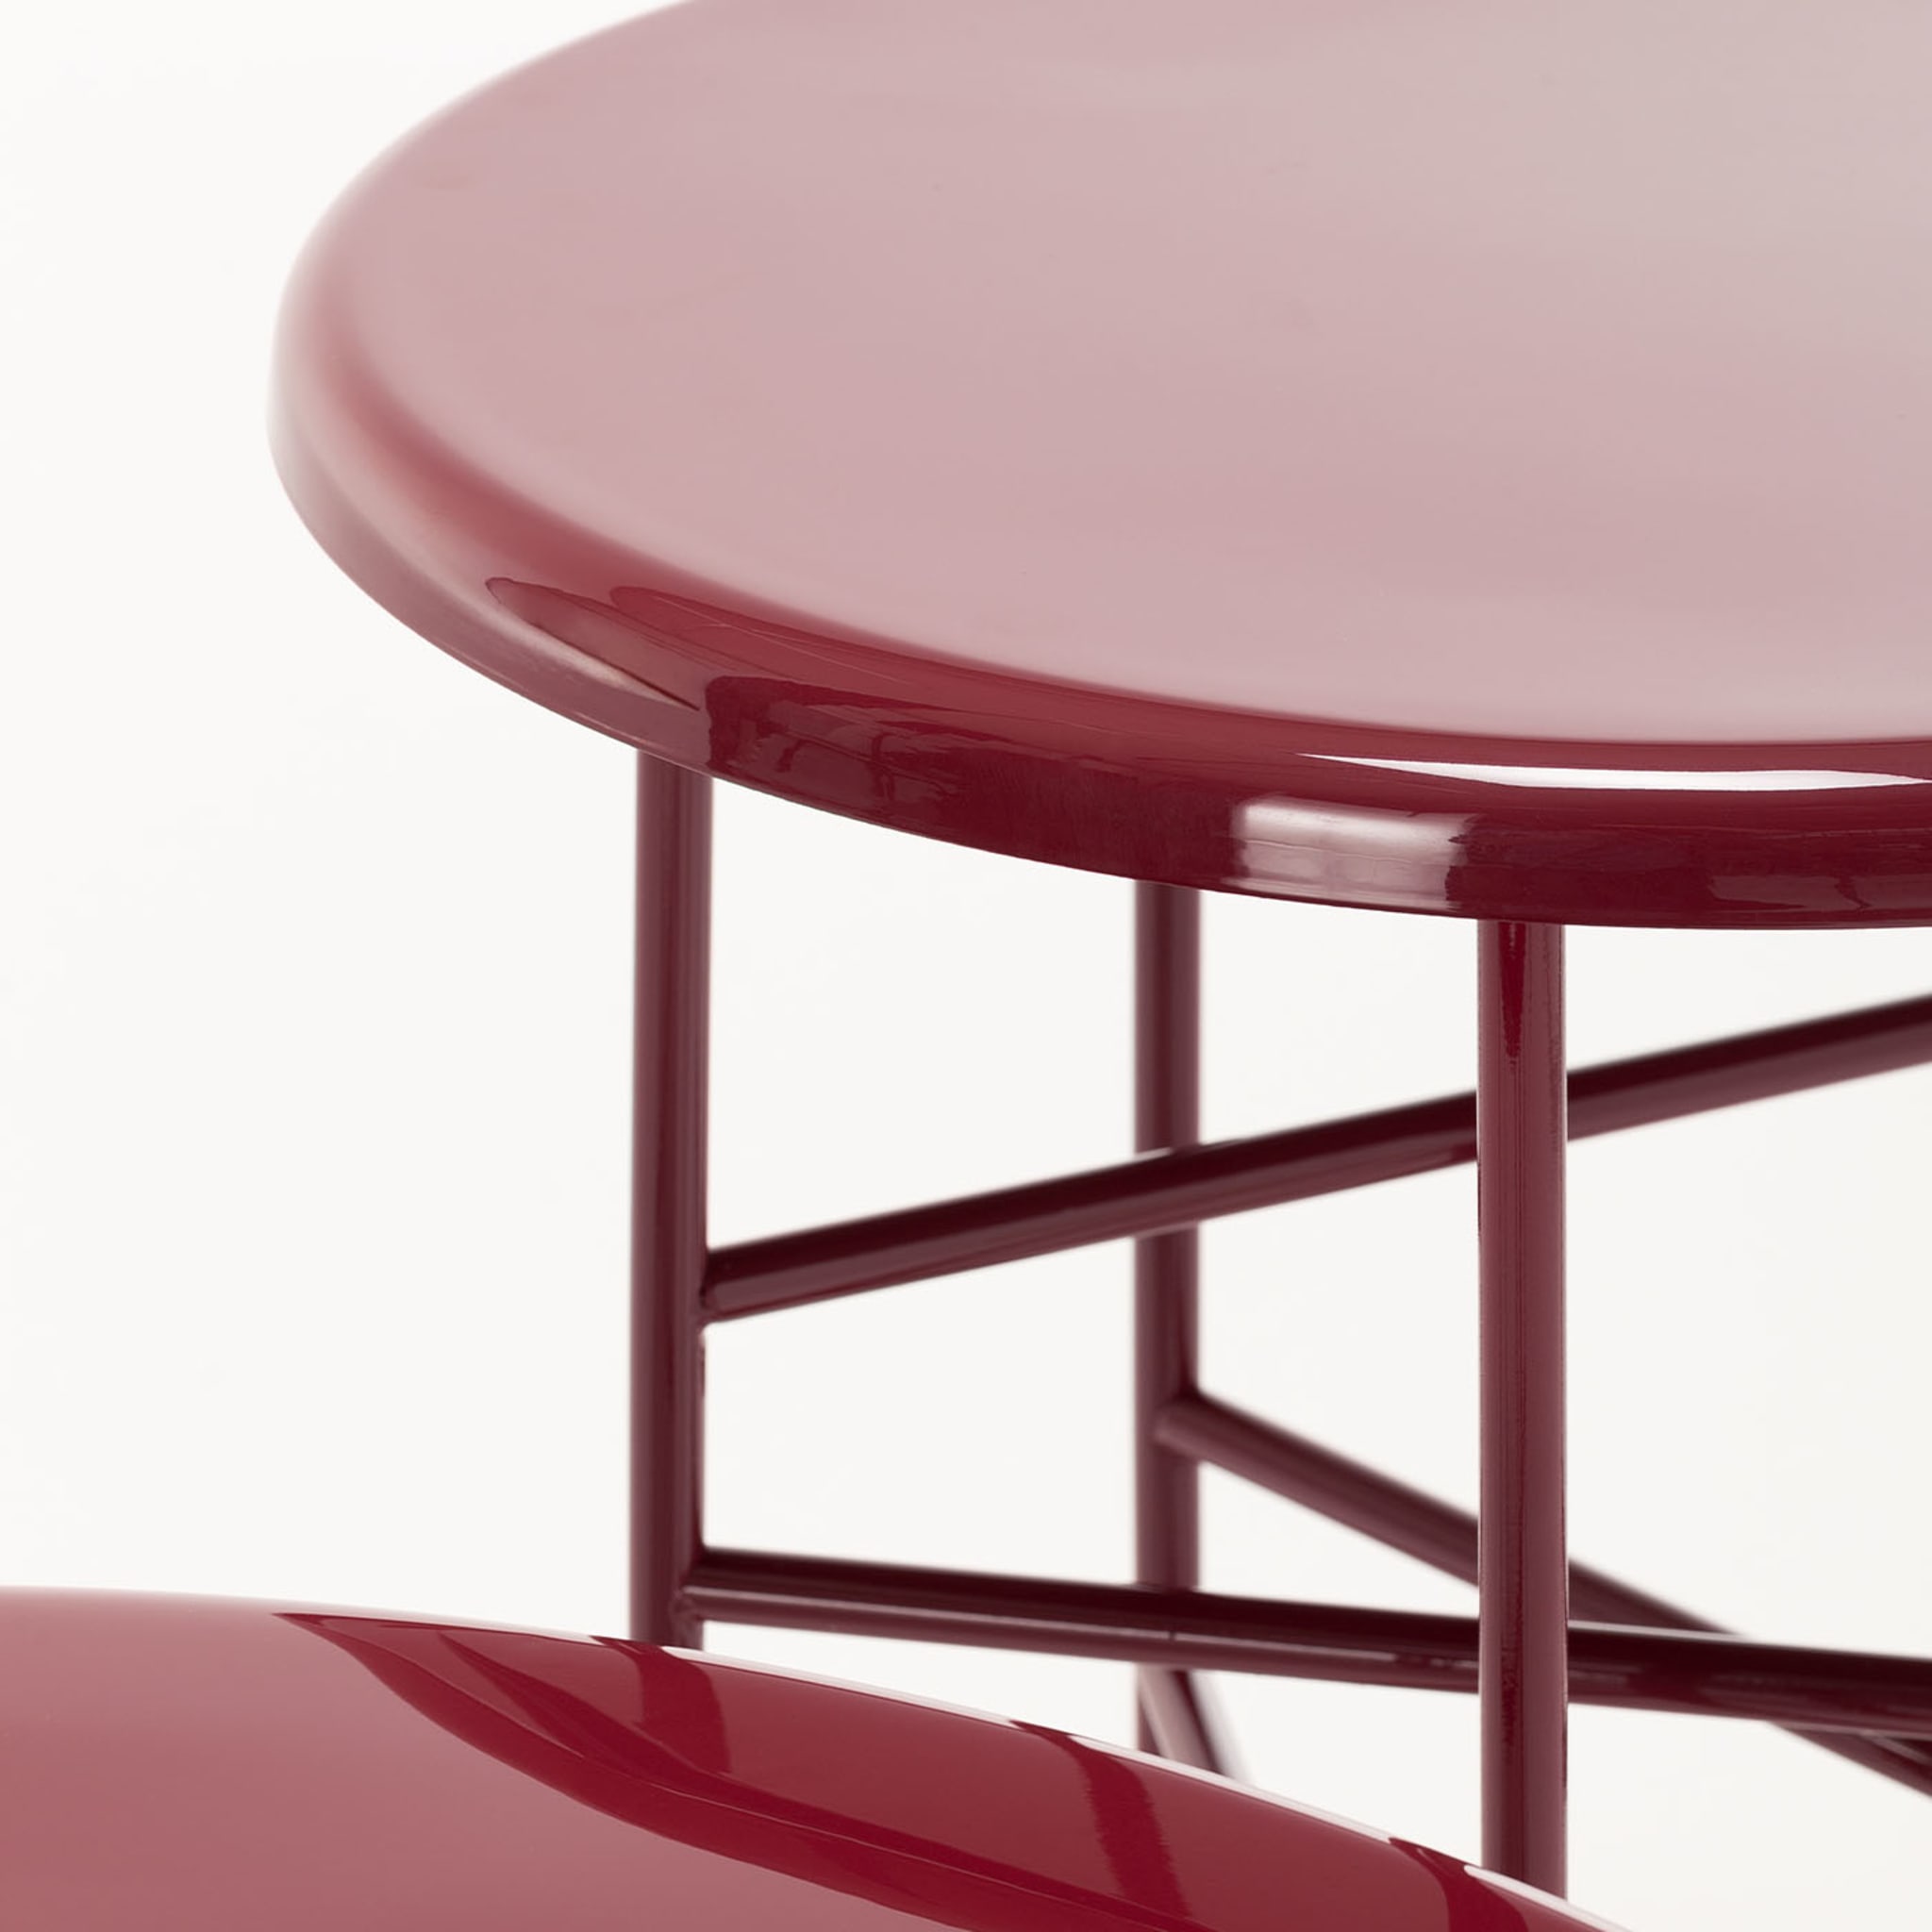 10th Star Red Glossy Lacquered Side Table 40 - Alternative view 2